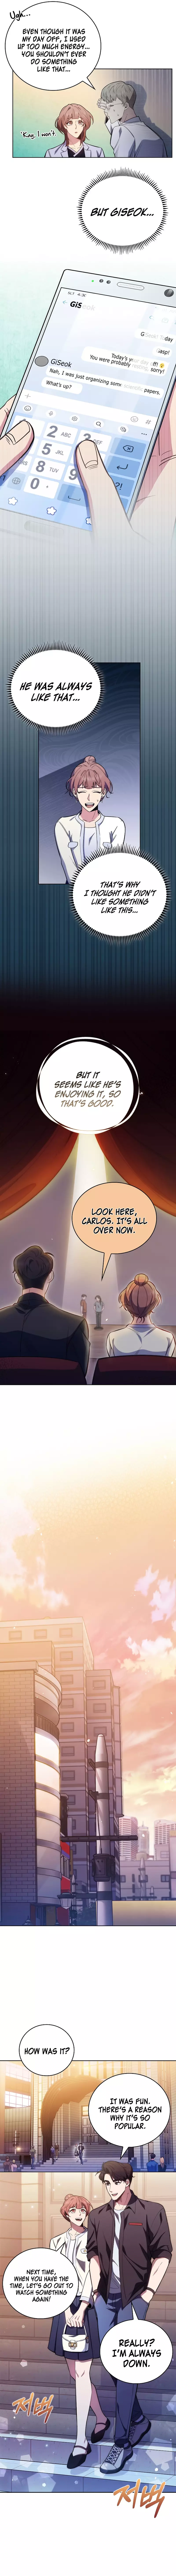 Level-Up Doctor (Manhwa) - 47 page 7-972d7ebd